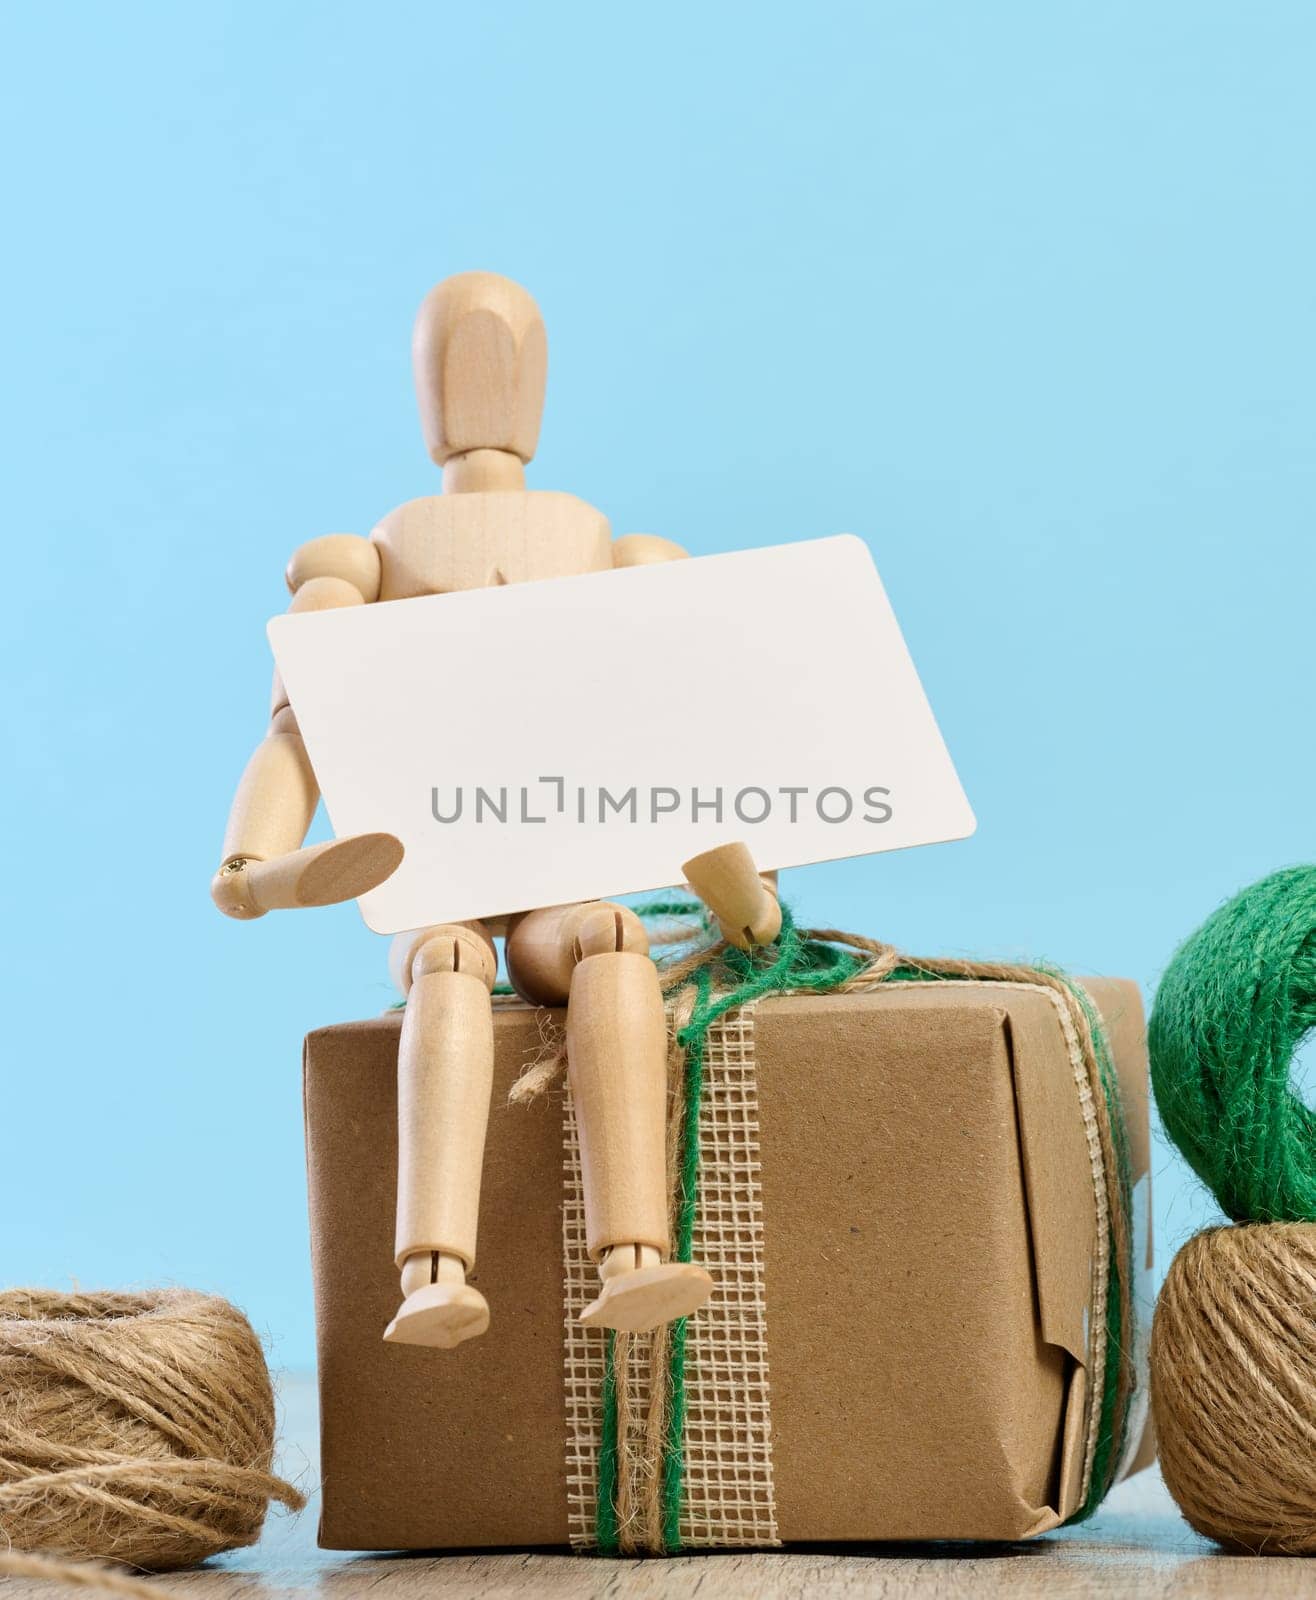 Wooden mannequin holding a white paper business card and gifts wrapped in brown craft paper on a blue background by ndanko